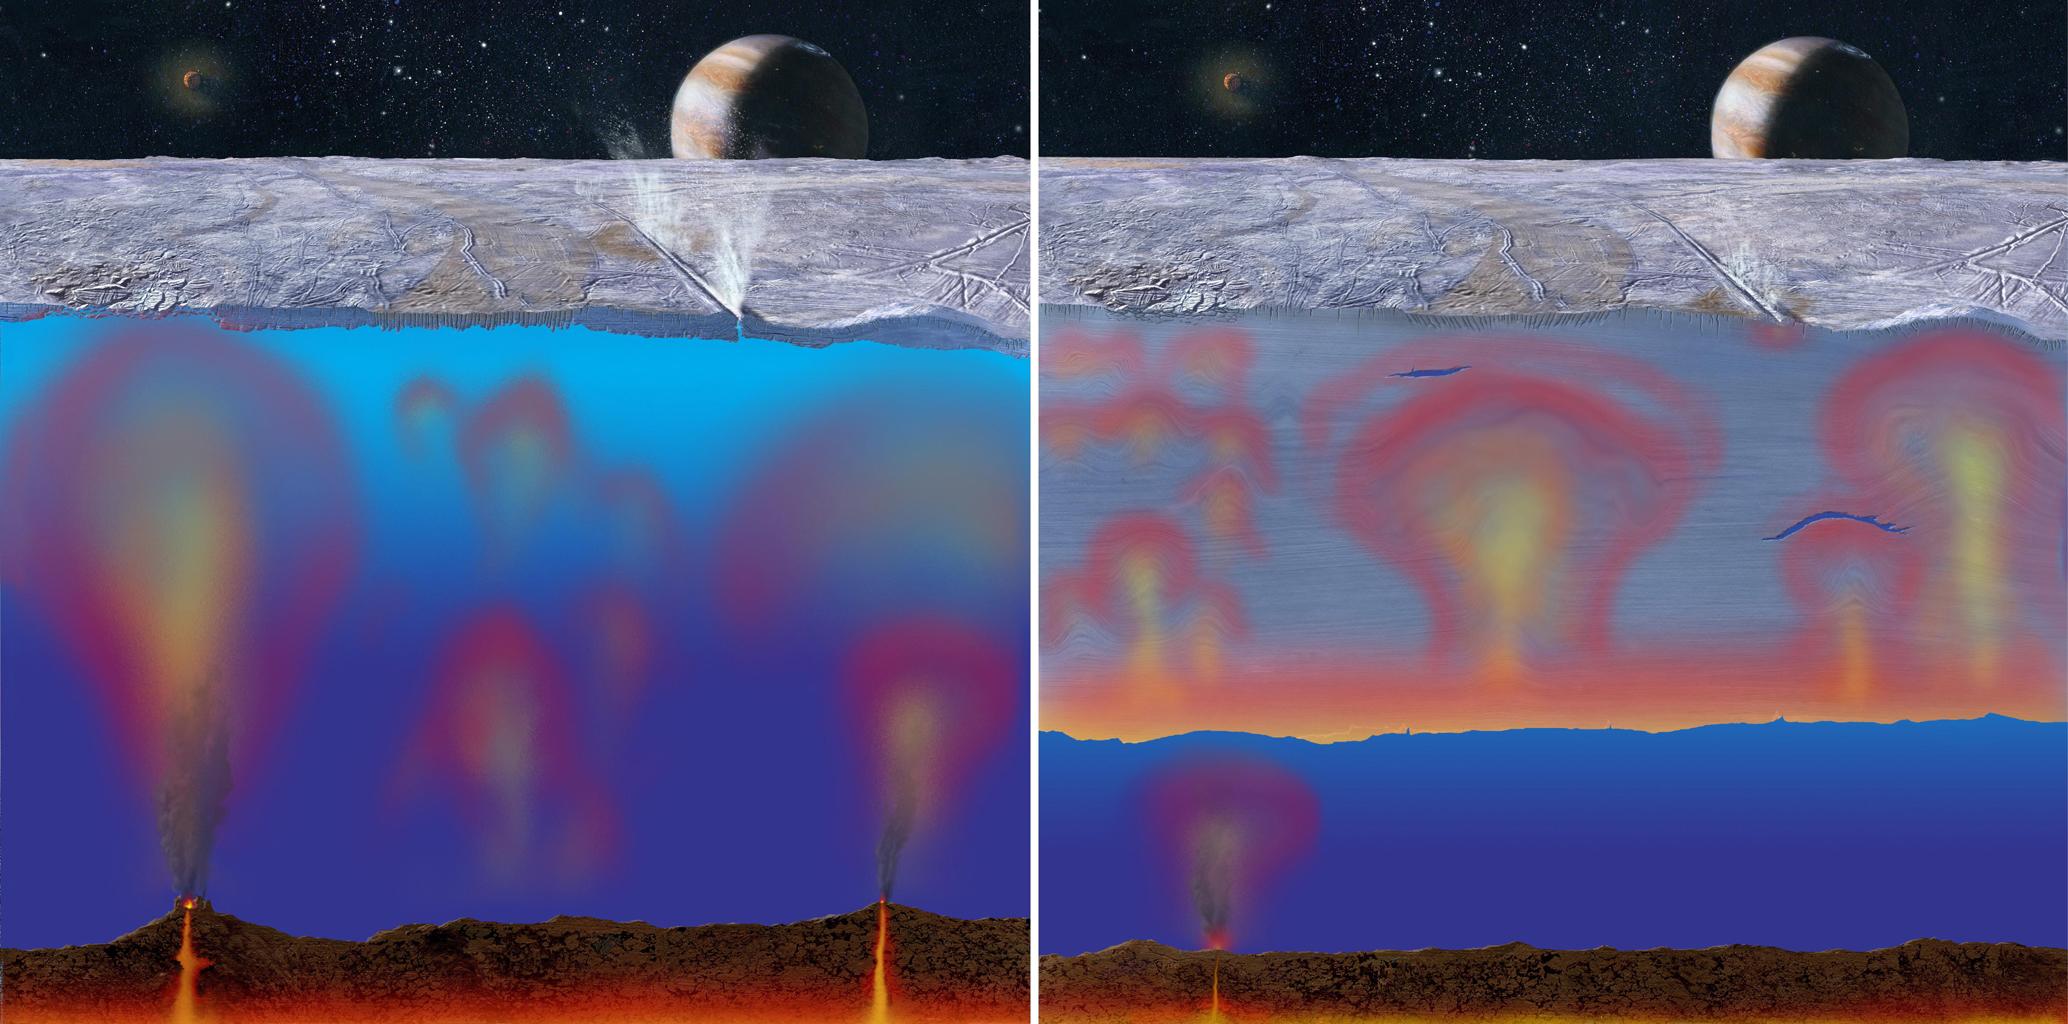 Is Jupiter's atmosphere thick or thin?